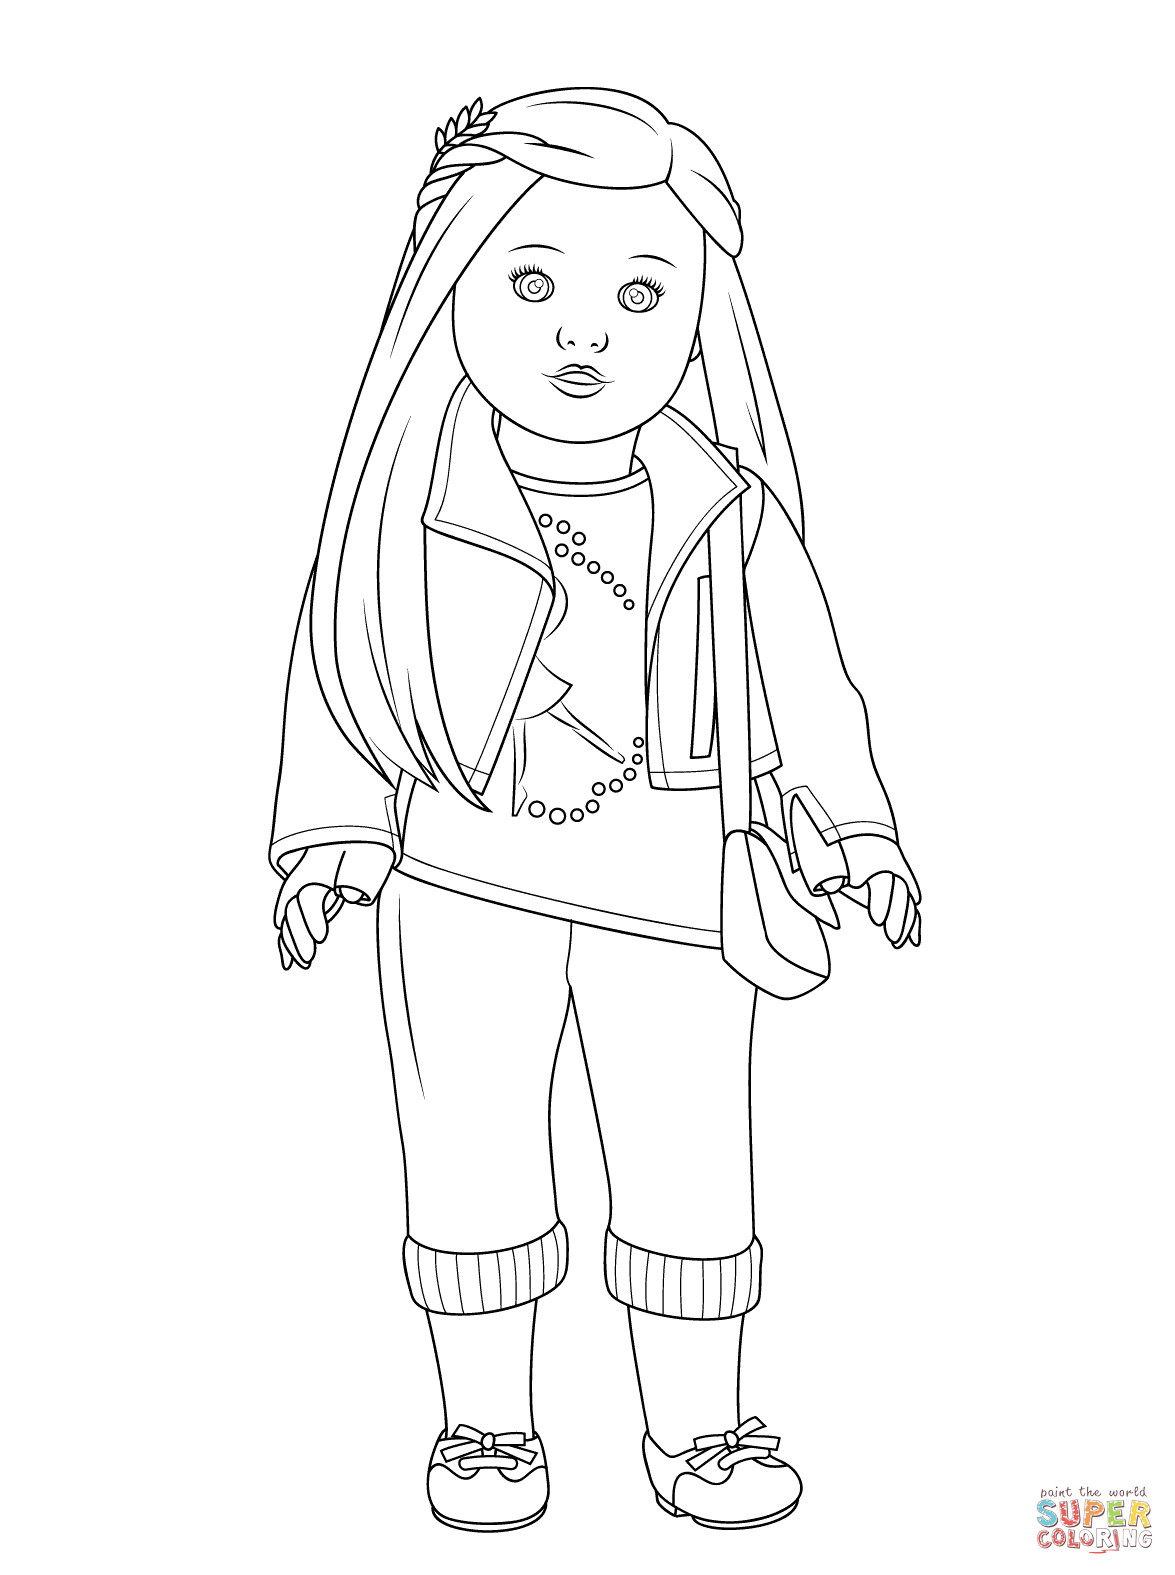 American Girl Dolls Coloring Pages
 American Girl Isabelle Doll coloring page